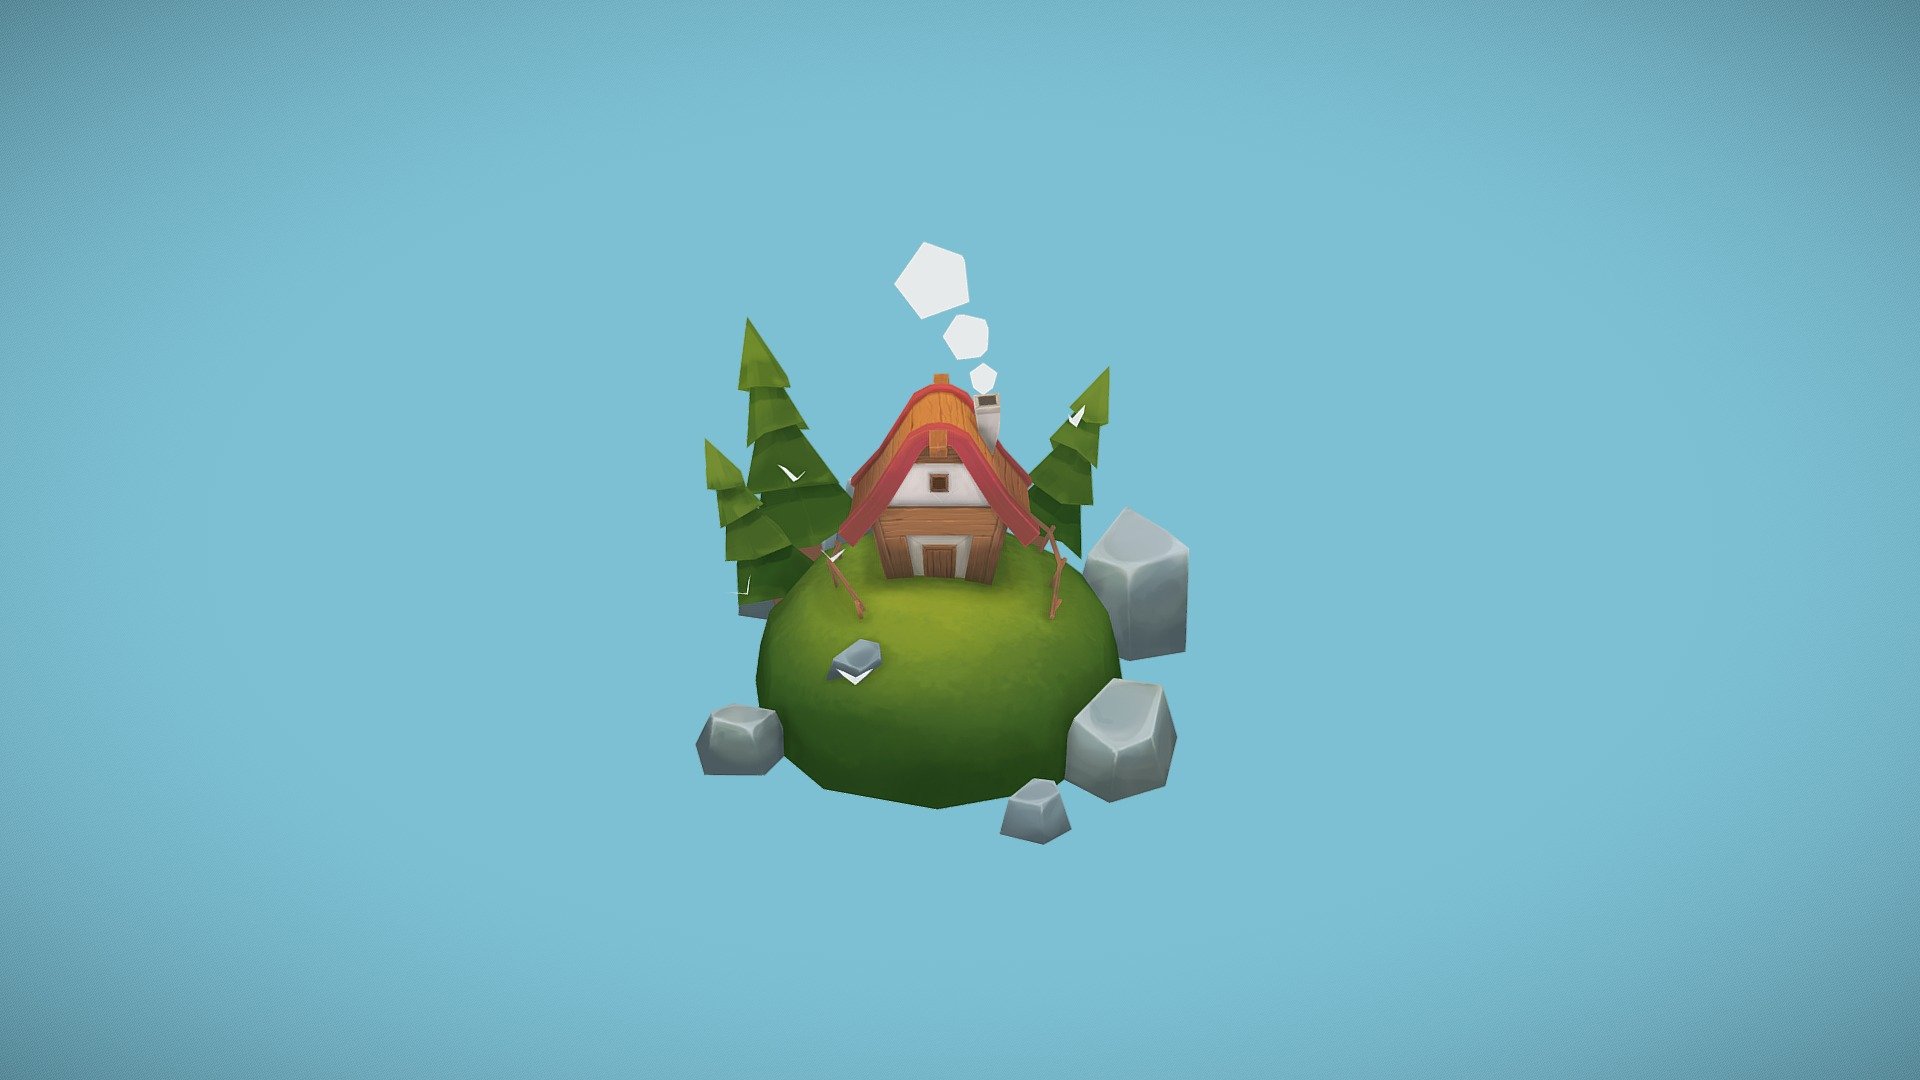 My first handpainted 3d model:) Stylised cartoon house to practise my skills - Cartoon house - 3D model by voloshincg 3d model